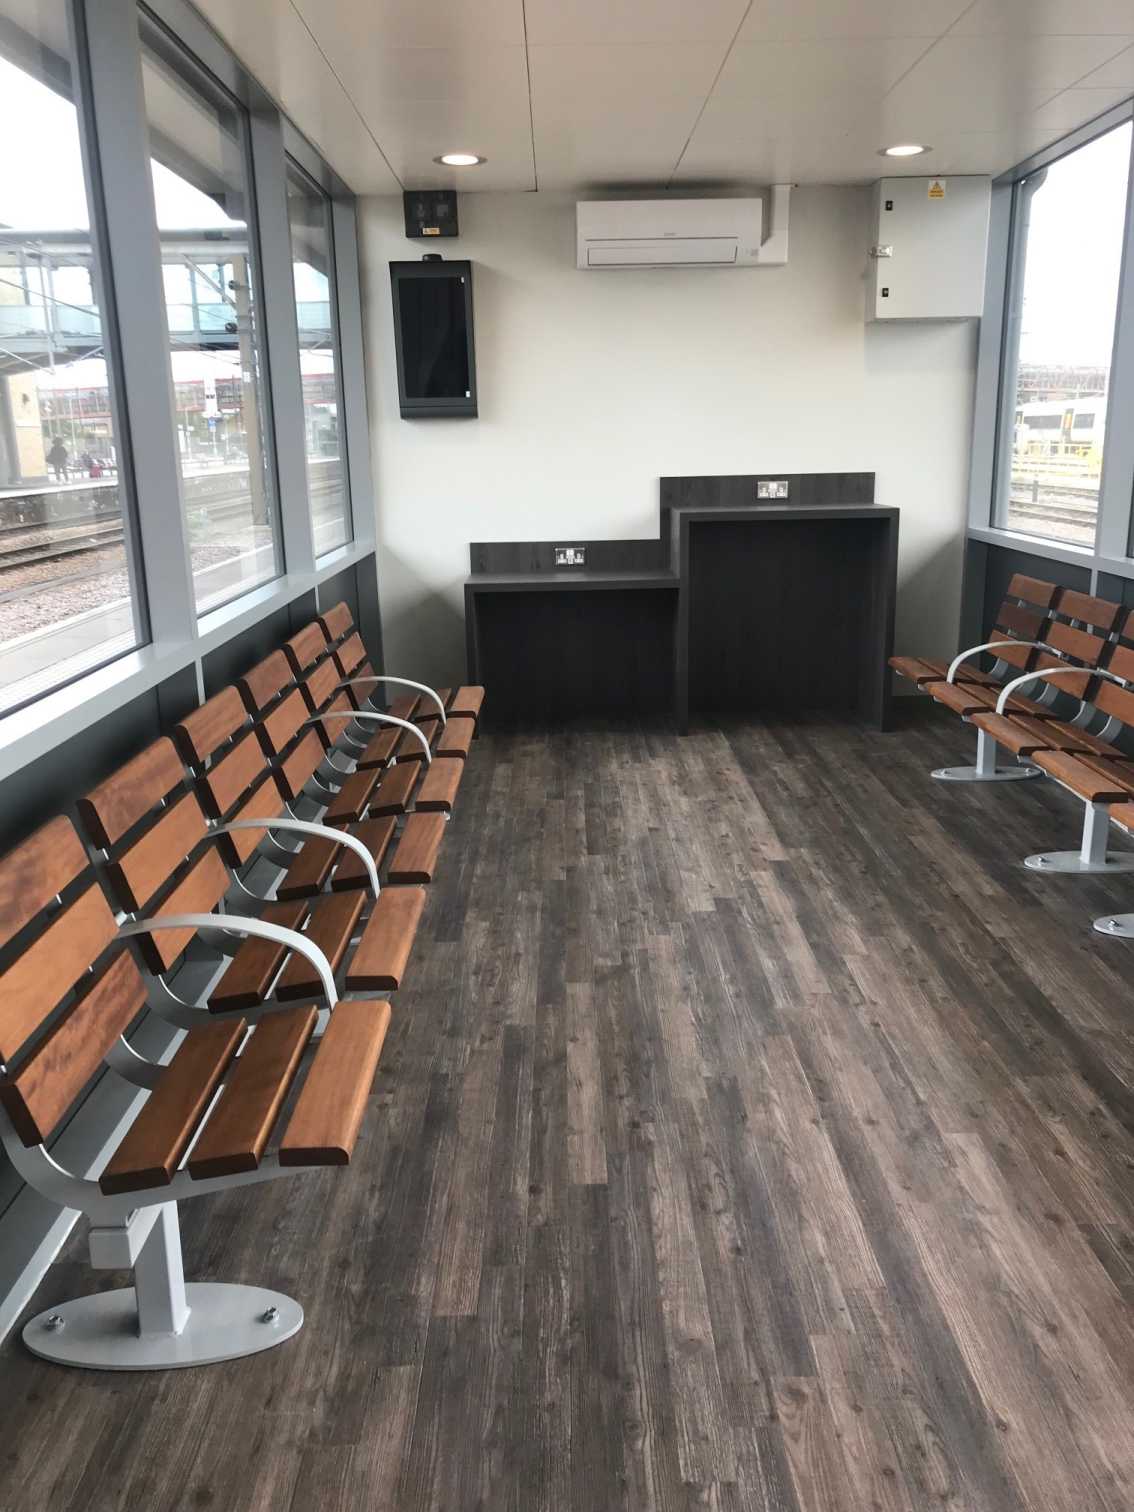 A different interior view of the new waiting room